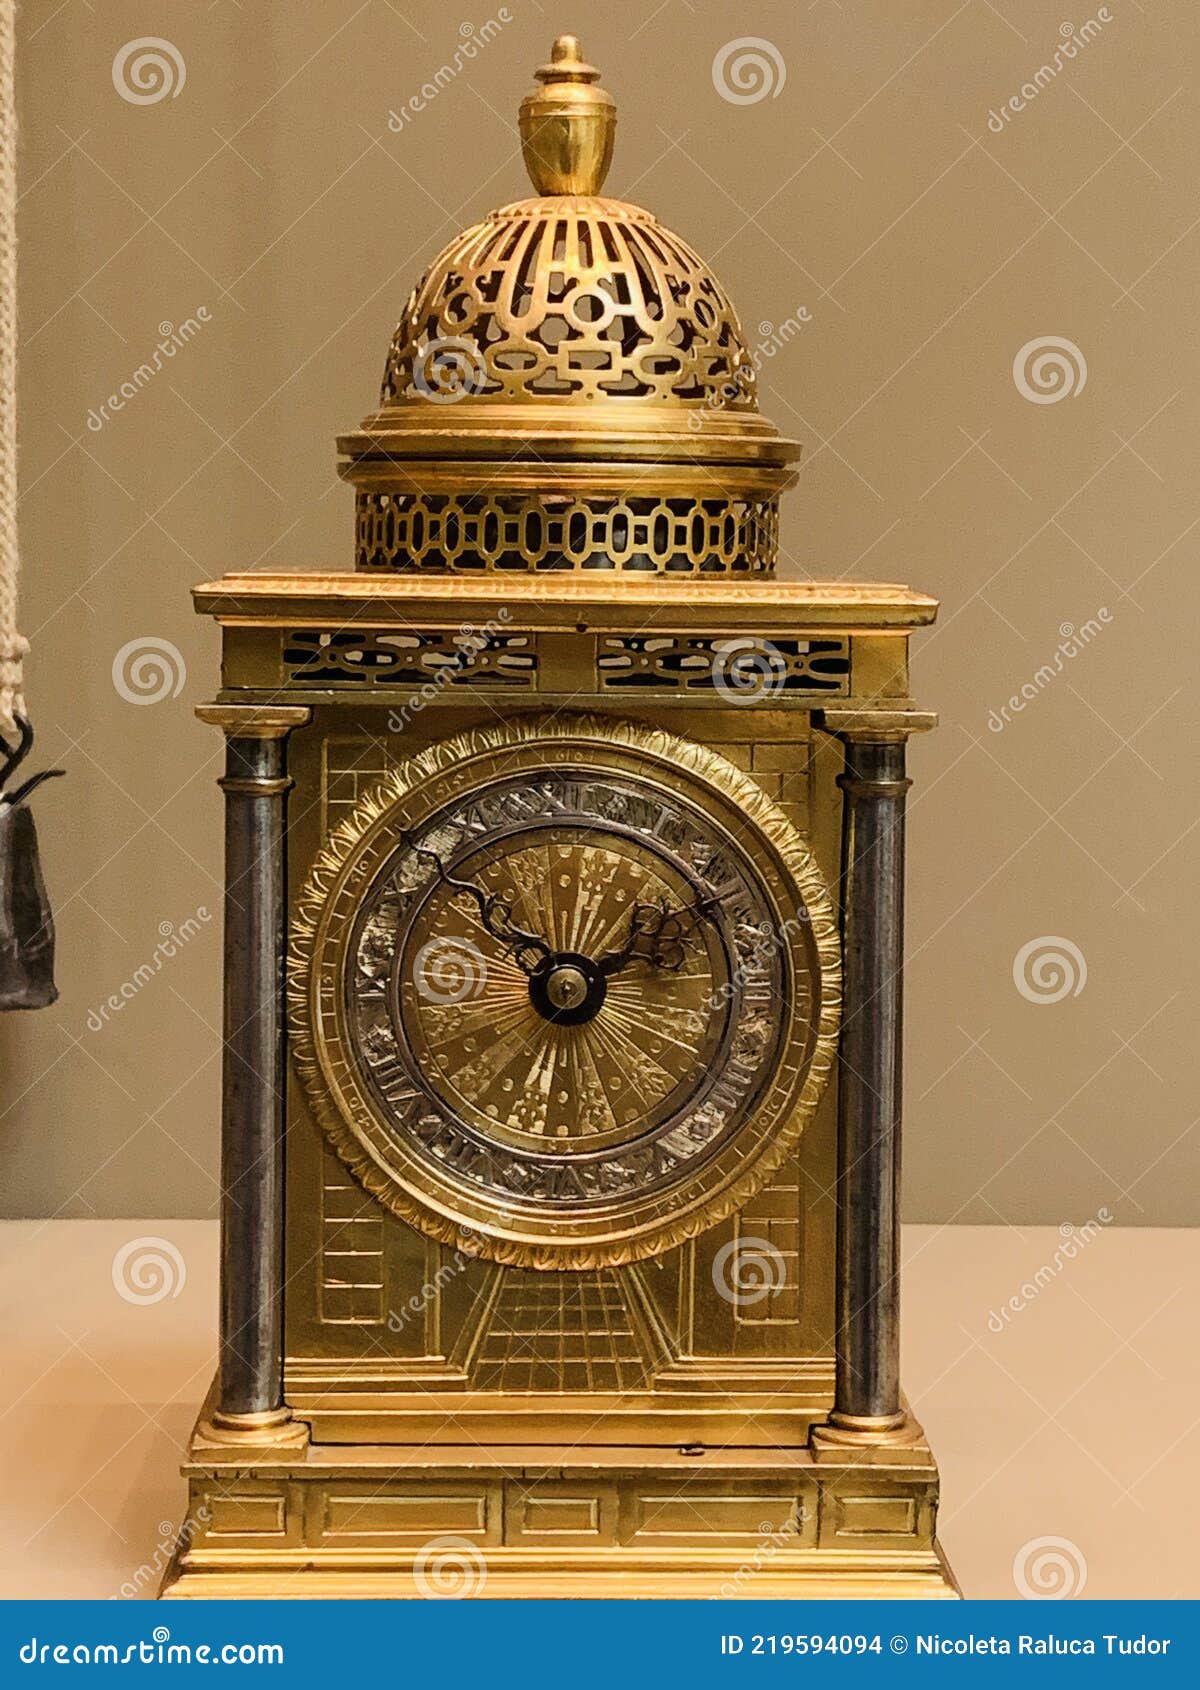 Komst Politieagent vinger Table Clock Made Around 1600 by a Dutch or Flemish Immigrant in London  Editorial Stock Image - Image of chased, arts: 219594094